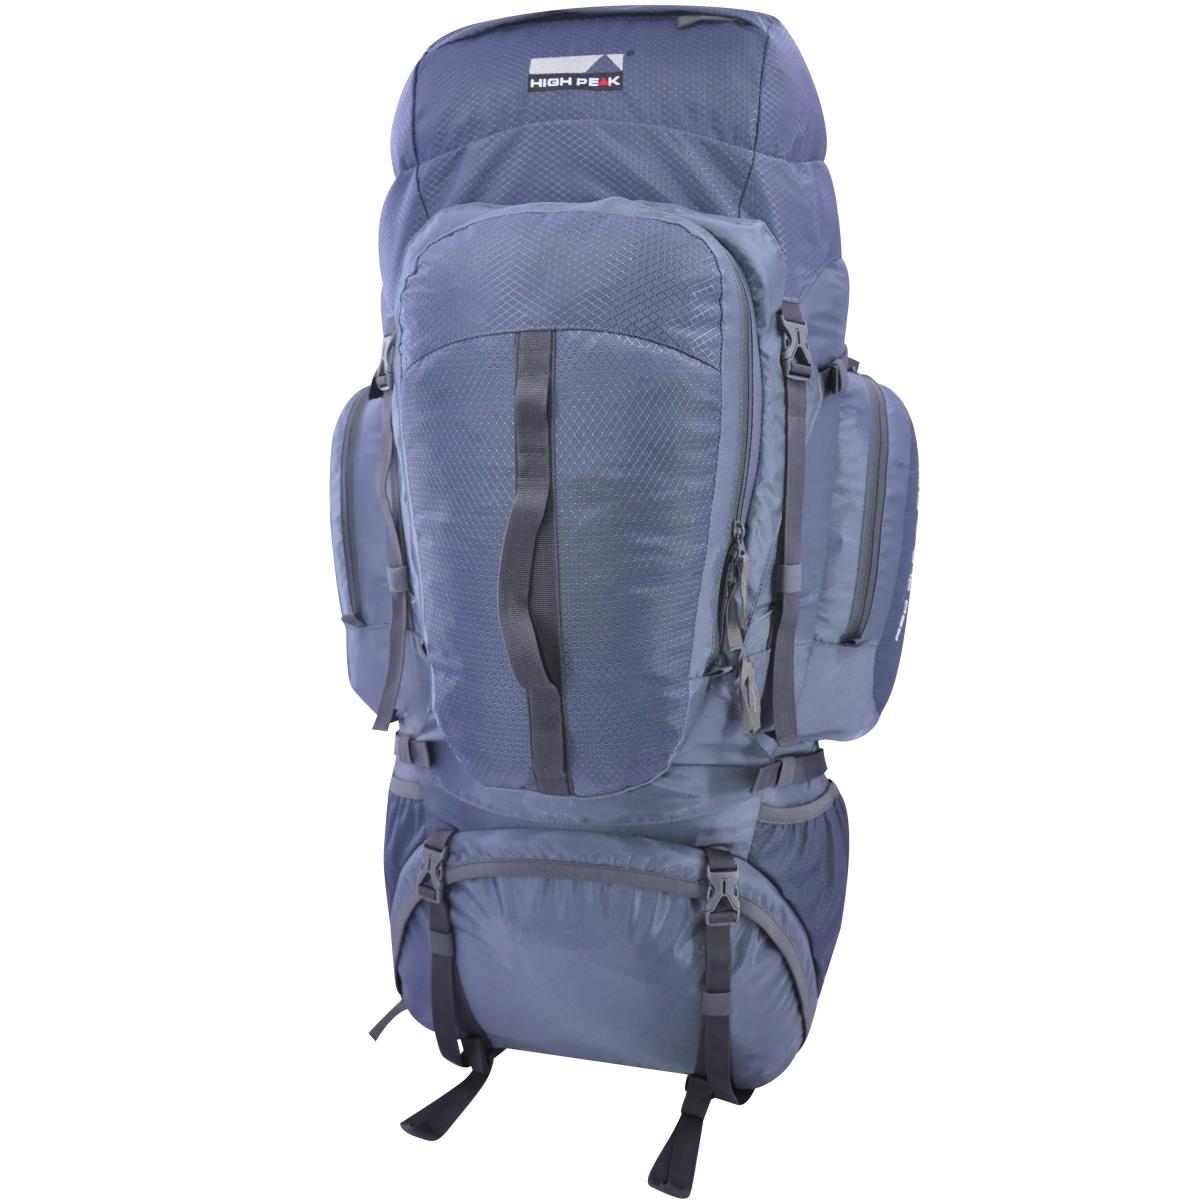 Pacific Crest 90 Plus 10 Expedition Backpack